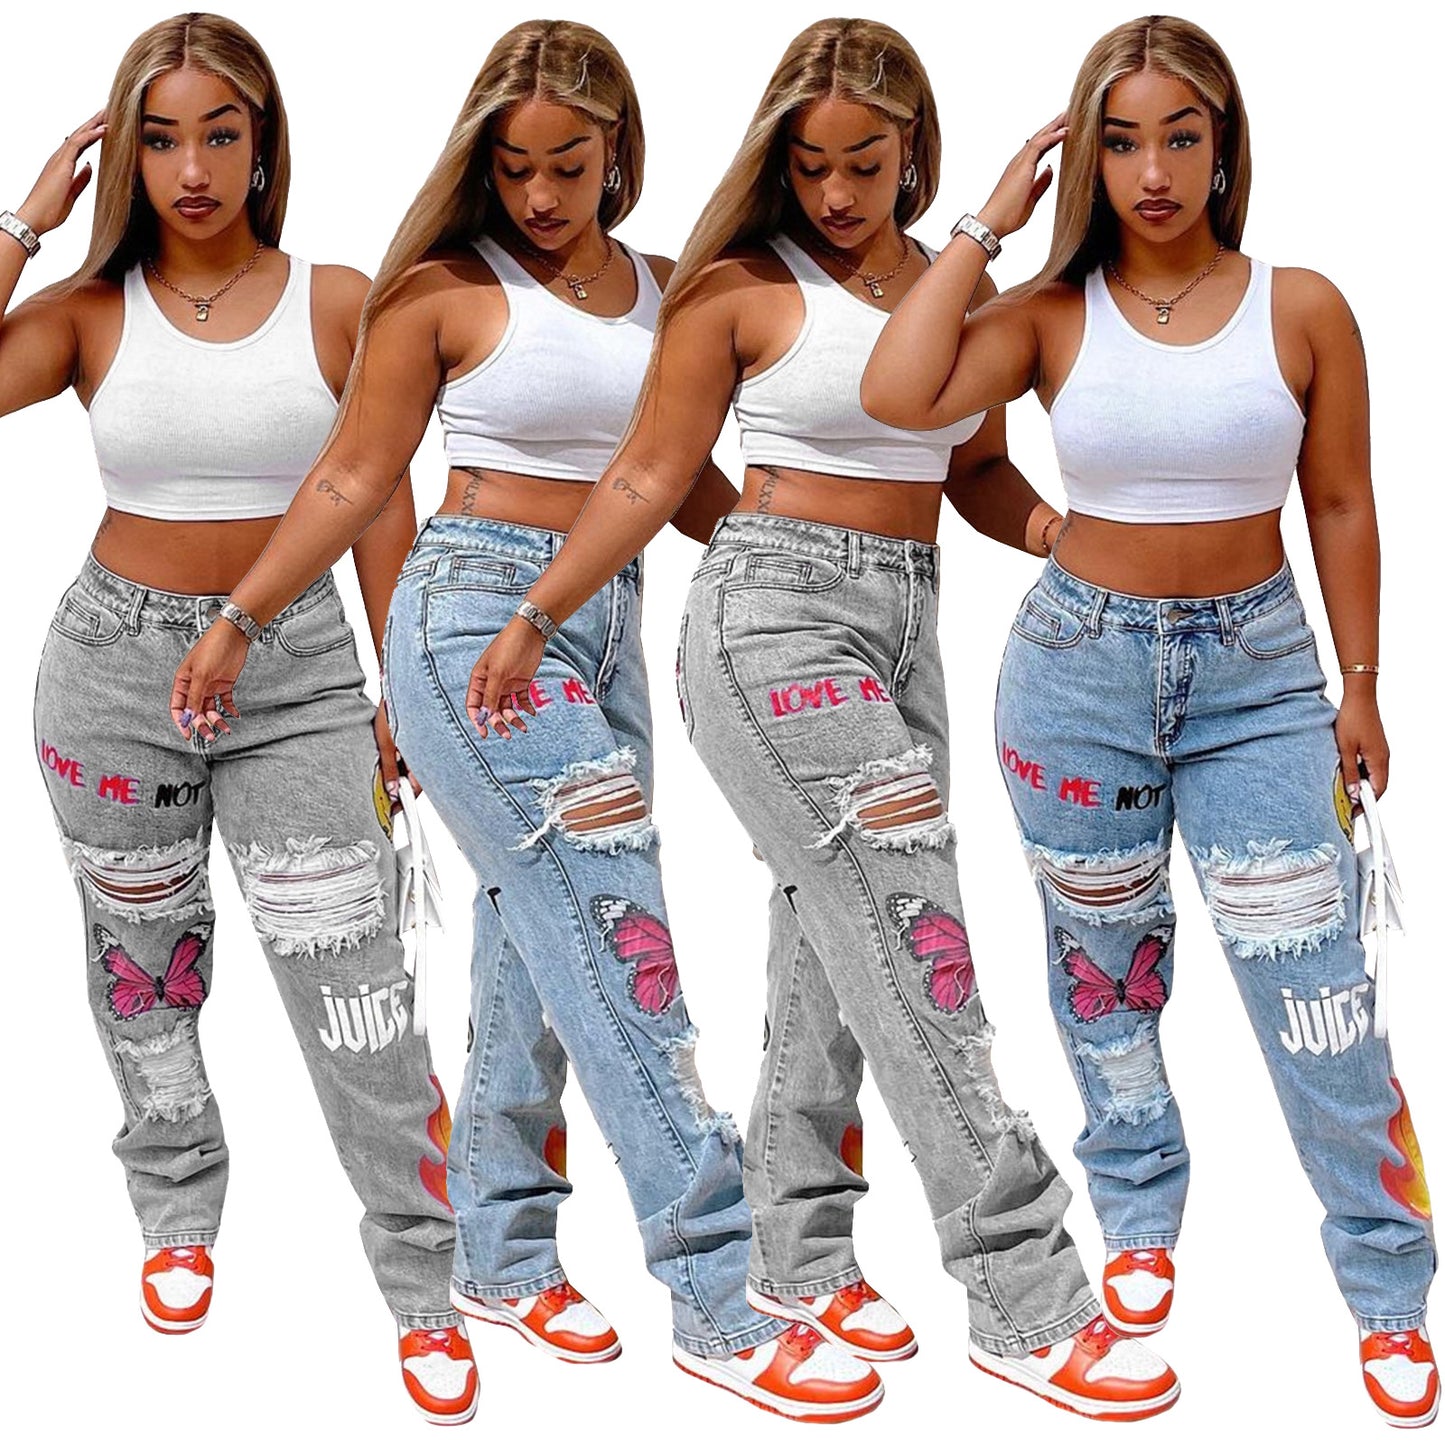 Women's Digital Positioning Print Ripped Fashion Jeans